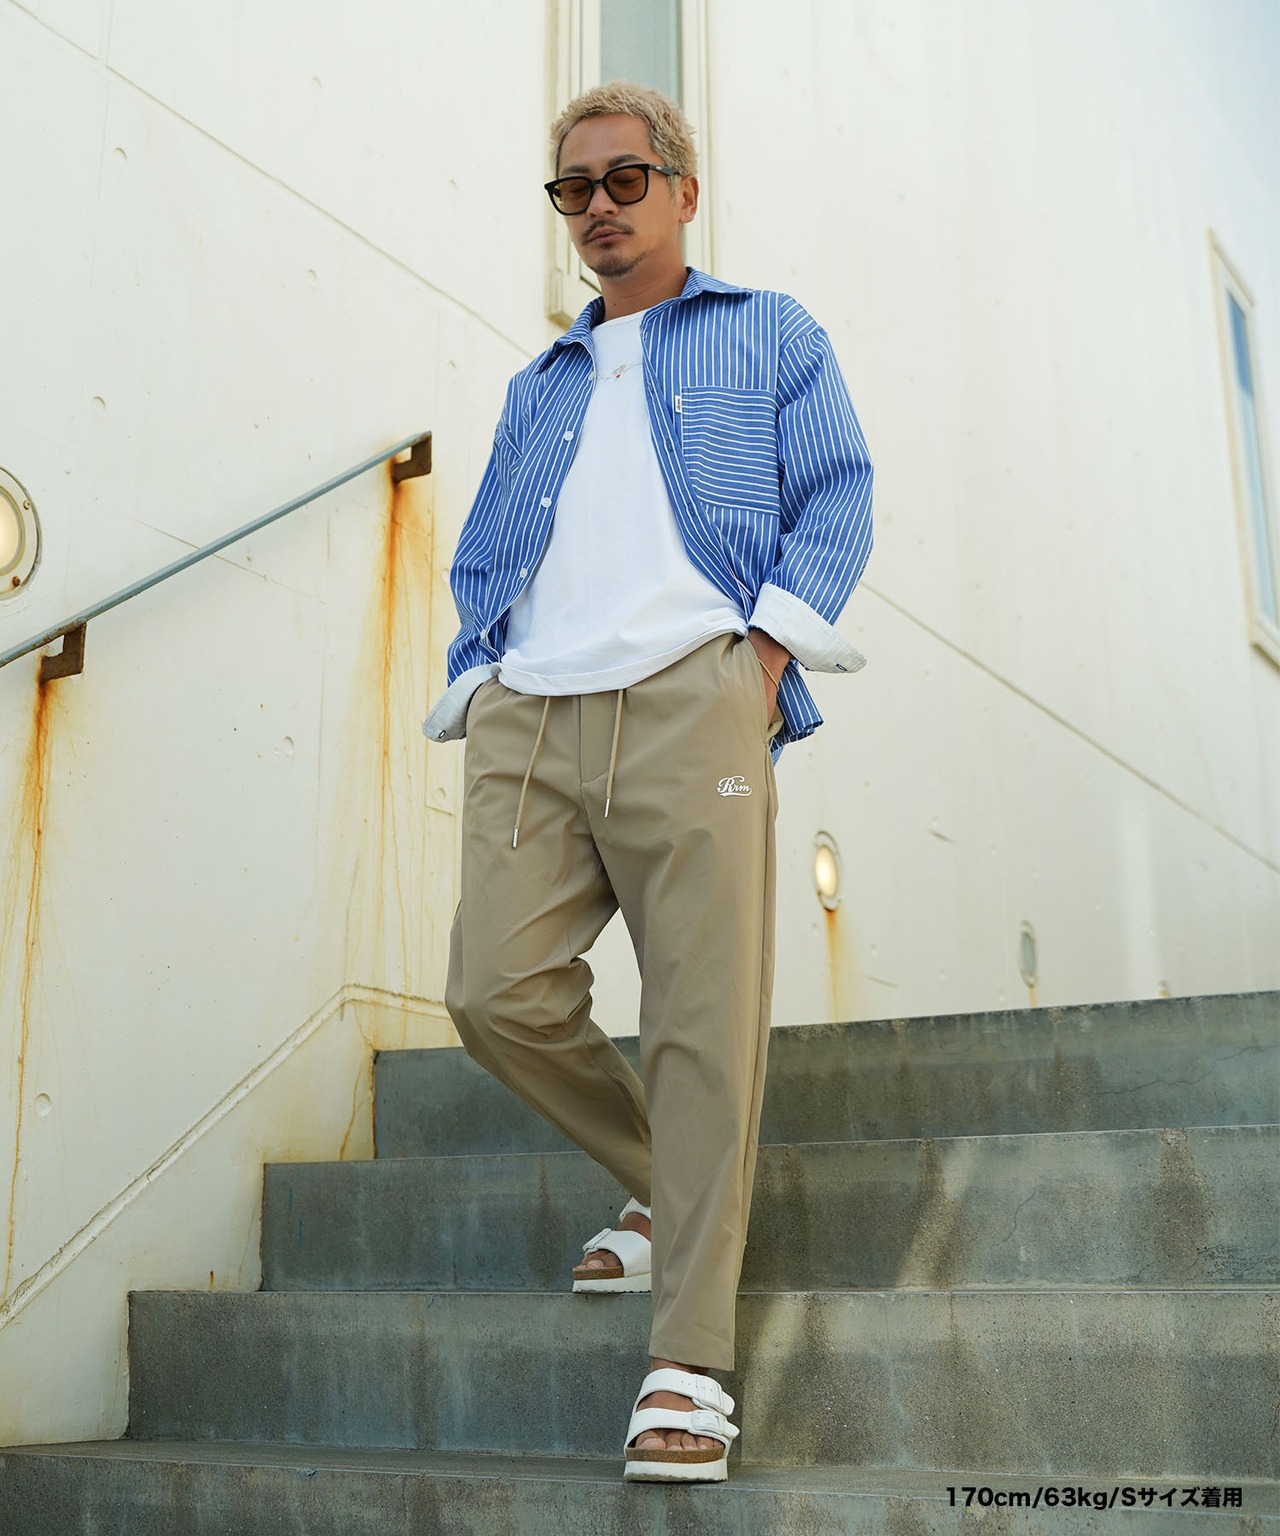 【#Re:room】4WAY STRETCH NYRON TAPERED PANTS［REP253］